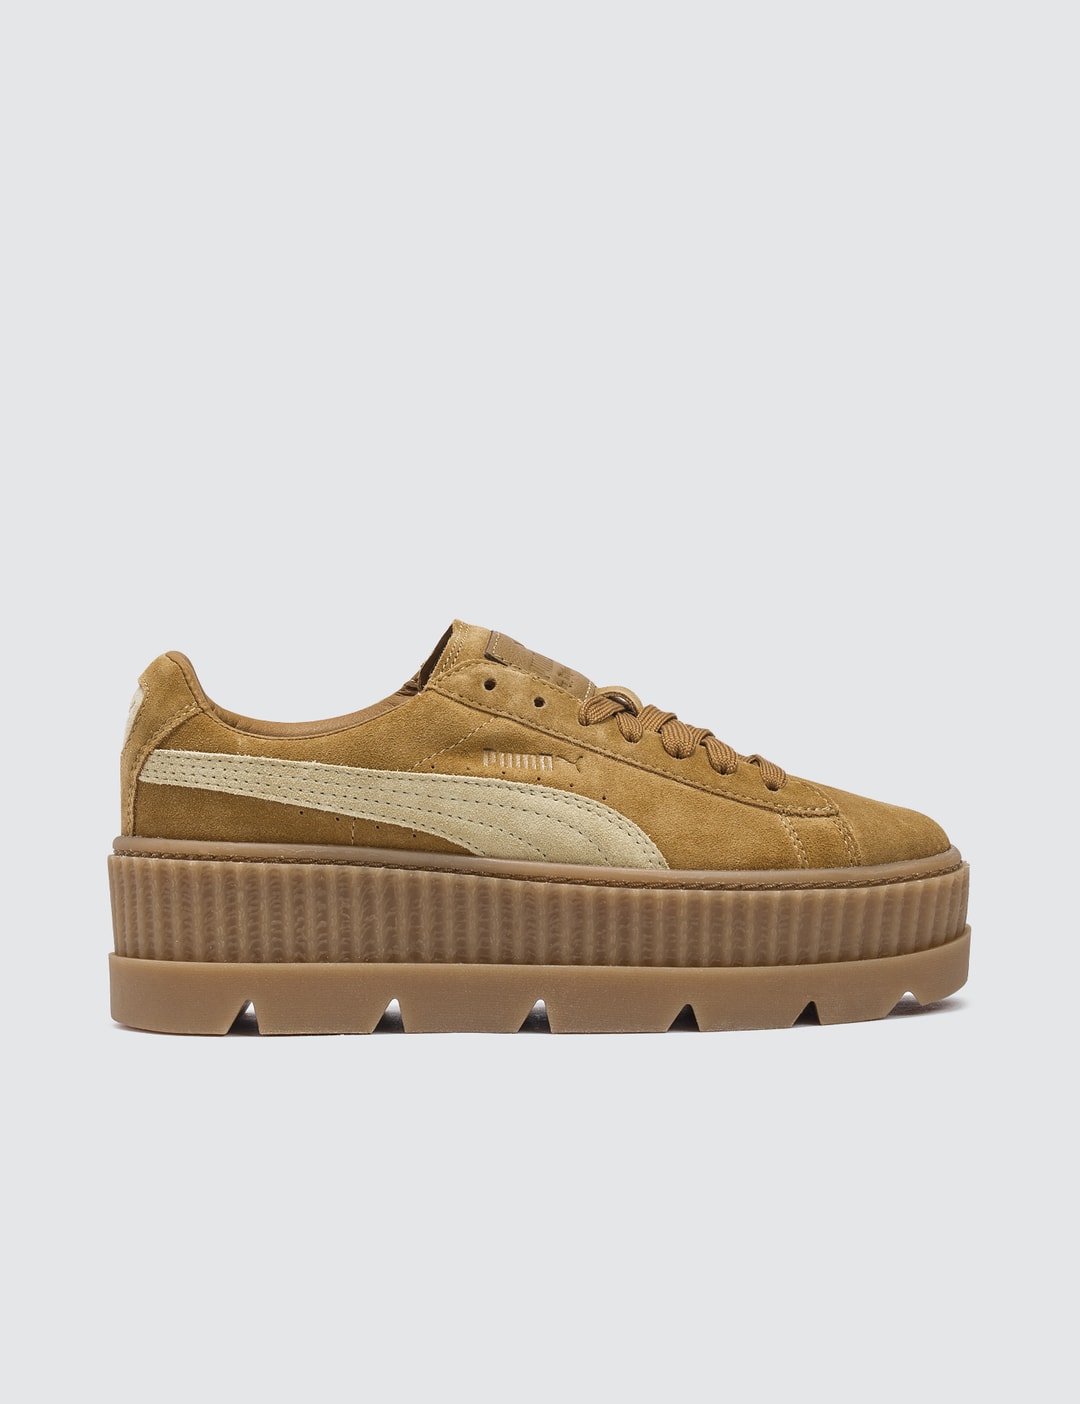 Fenty Puma By Rihanna - Cleated Creeper Suede | HBX - Globally Curated ...